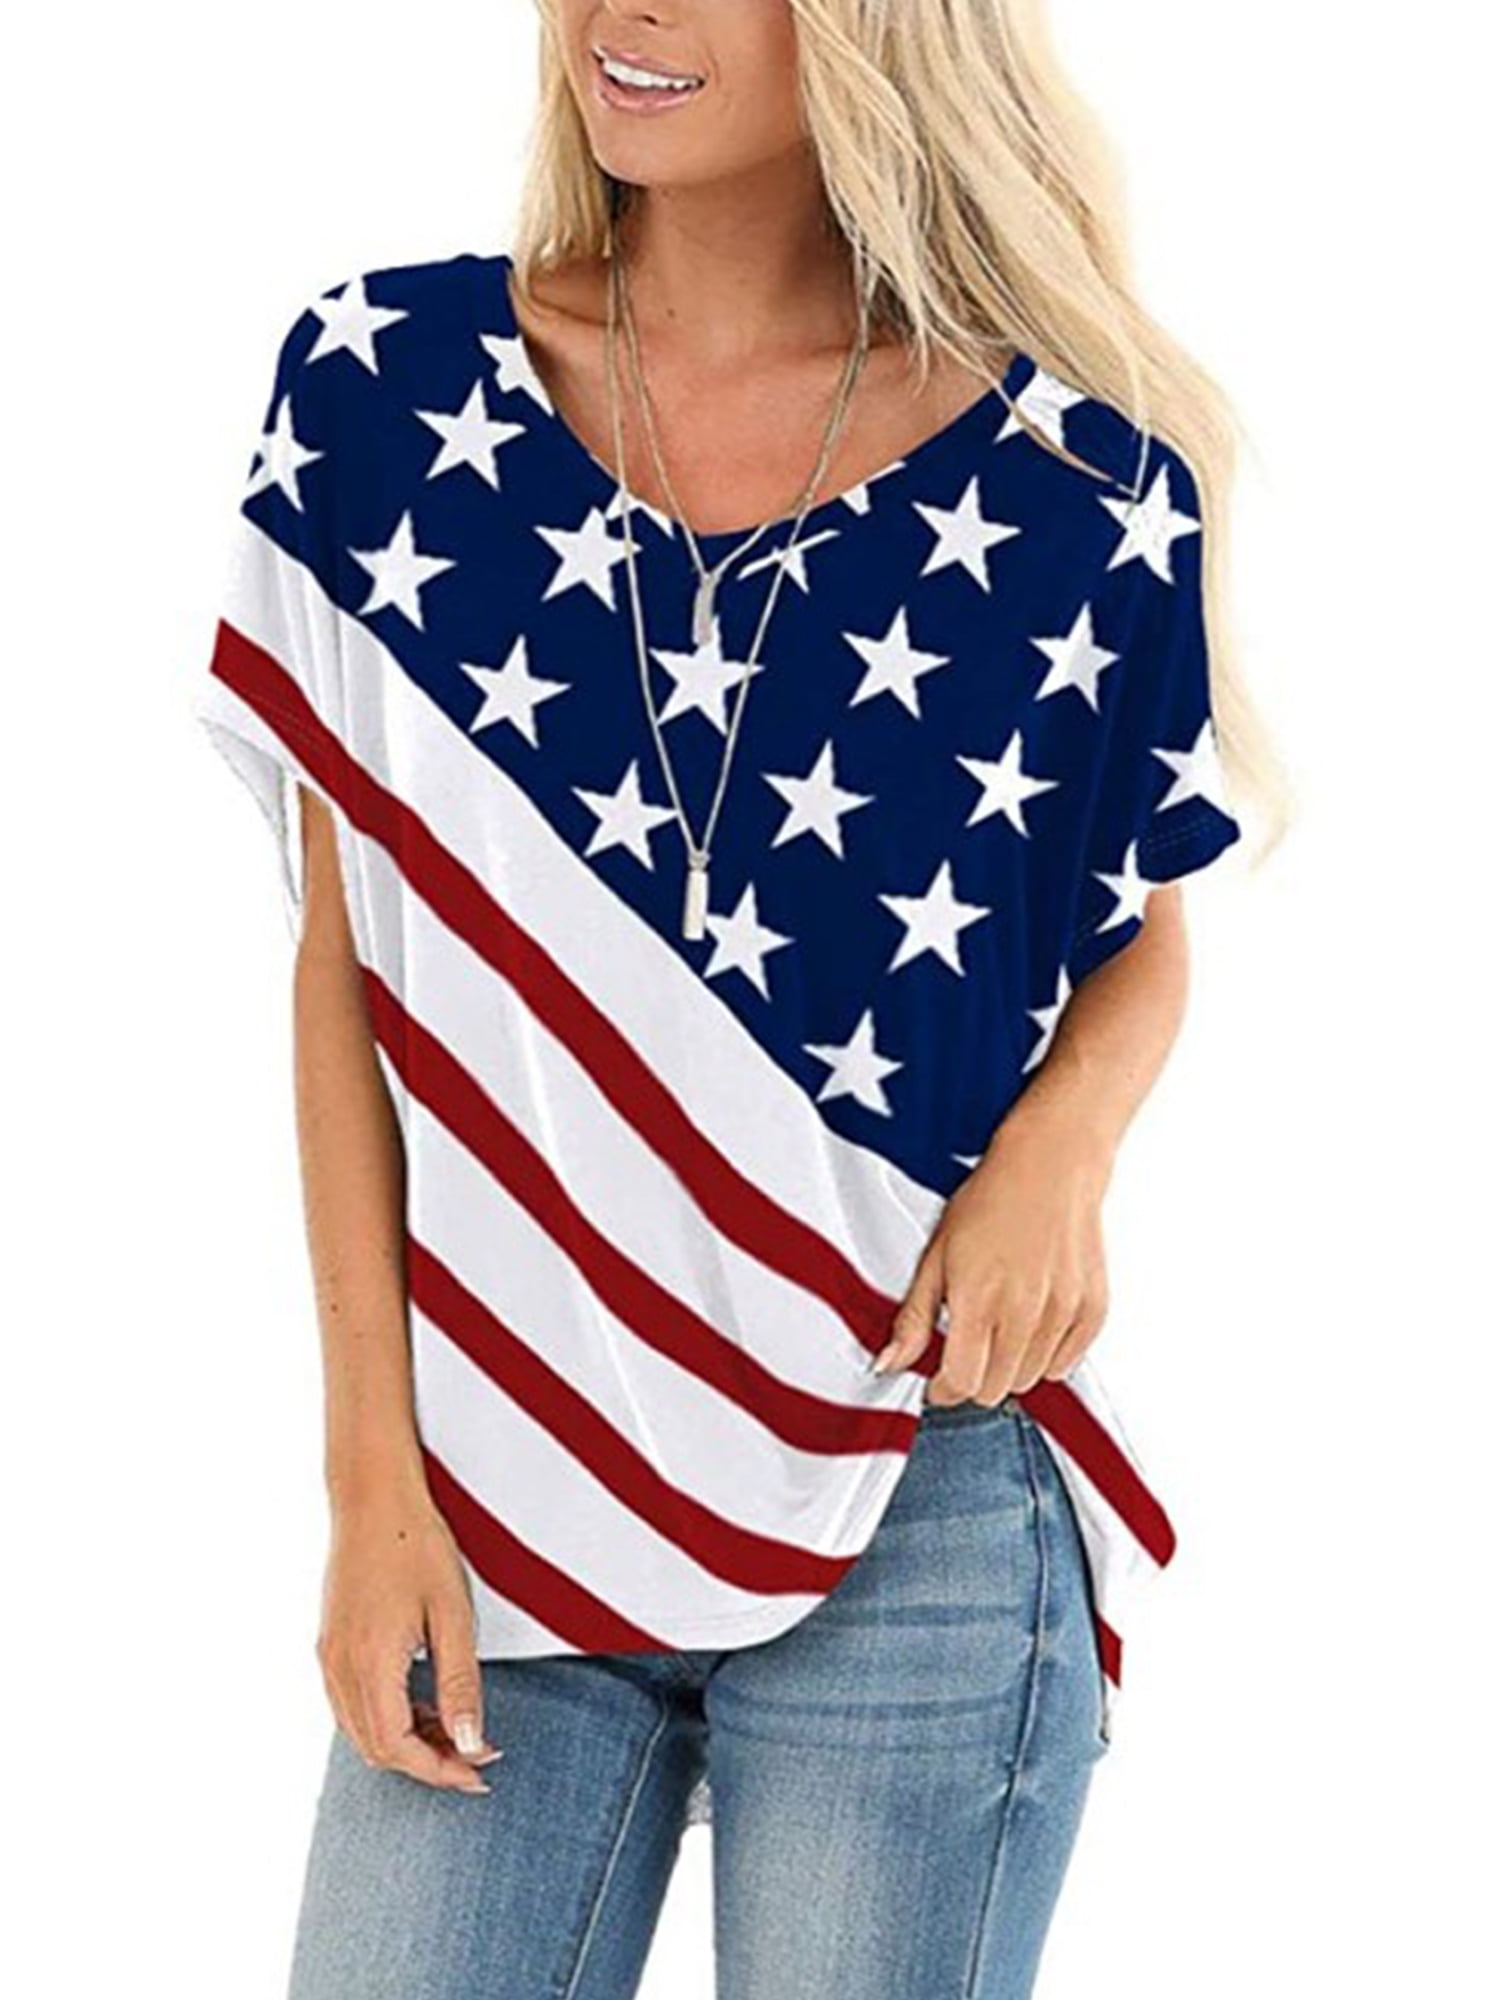 ODGear Womens Short Sleeve Star American Flag Print Tank Tops Blouse Shirts Summer New Independence Day